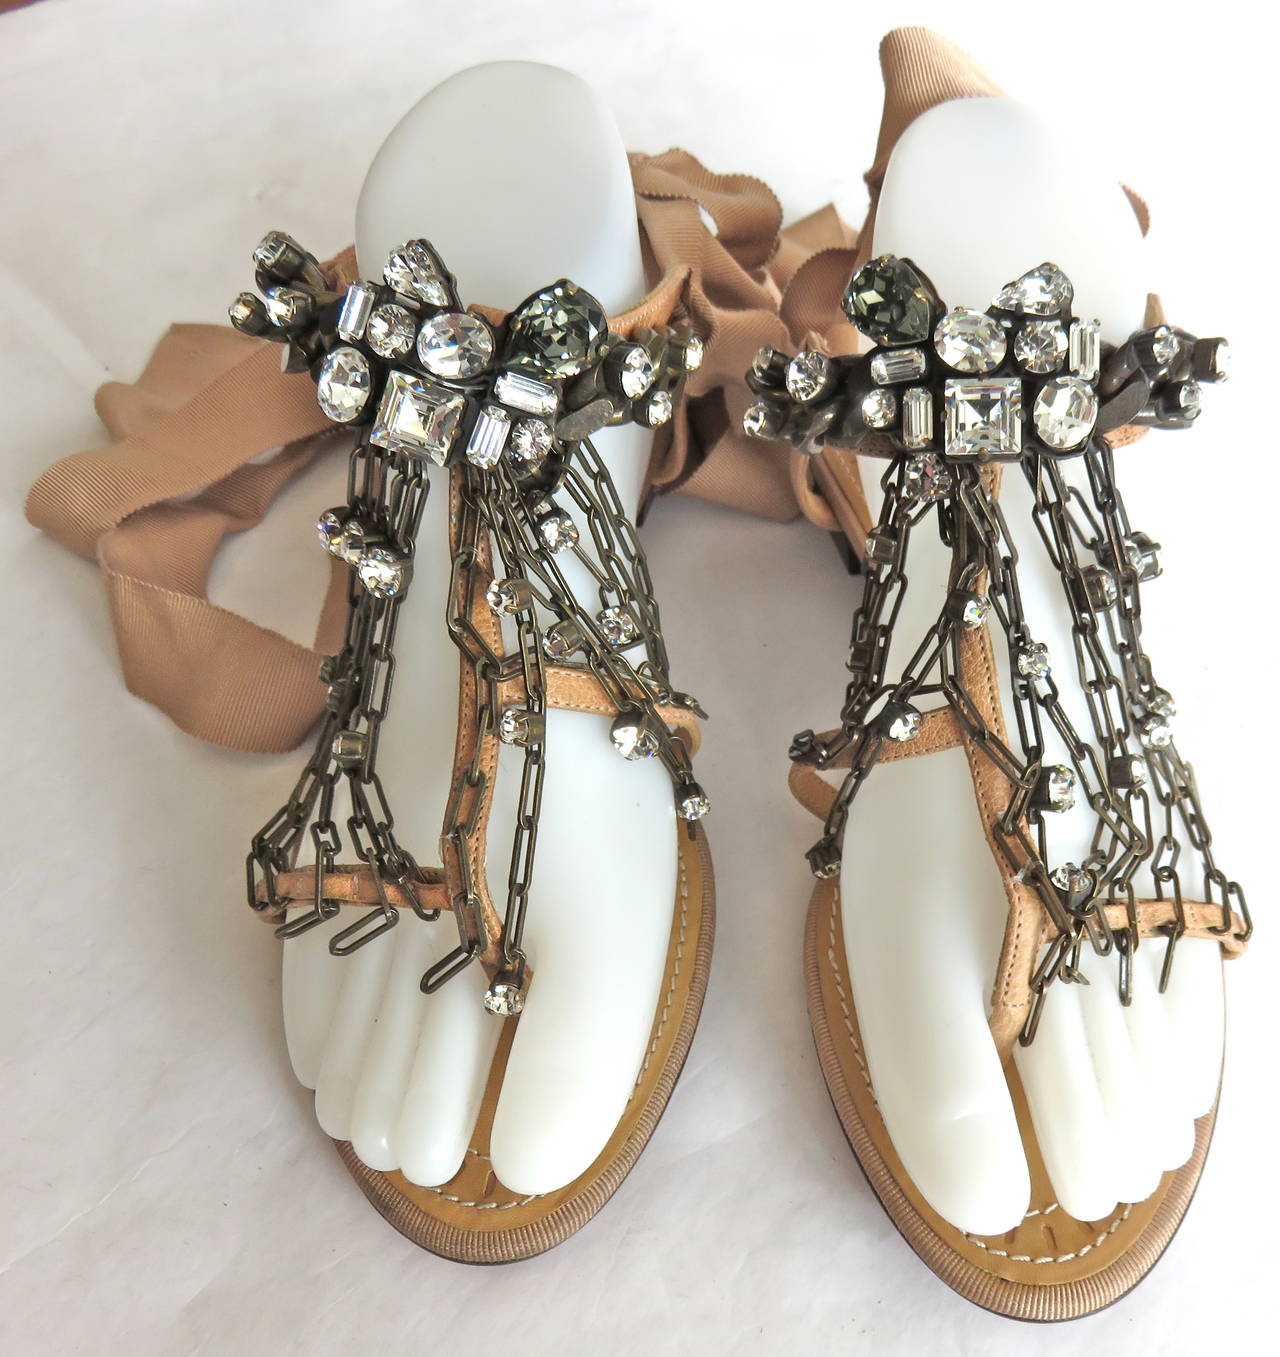 EDITOR'S NOTES:

New LANVIN PARIS Leather T-strap sandals with peach, grosgrain ribbon ties

Thick, dark brass metal chain with large sized rhinestone embellishments at main, top strap.

Smaller draped chain links at bottom strap with loose,